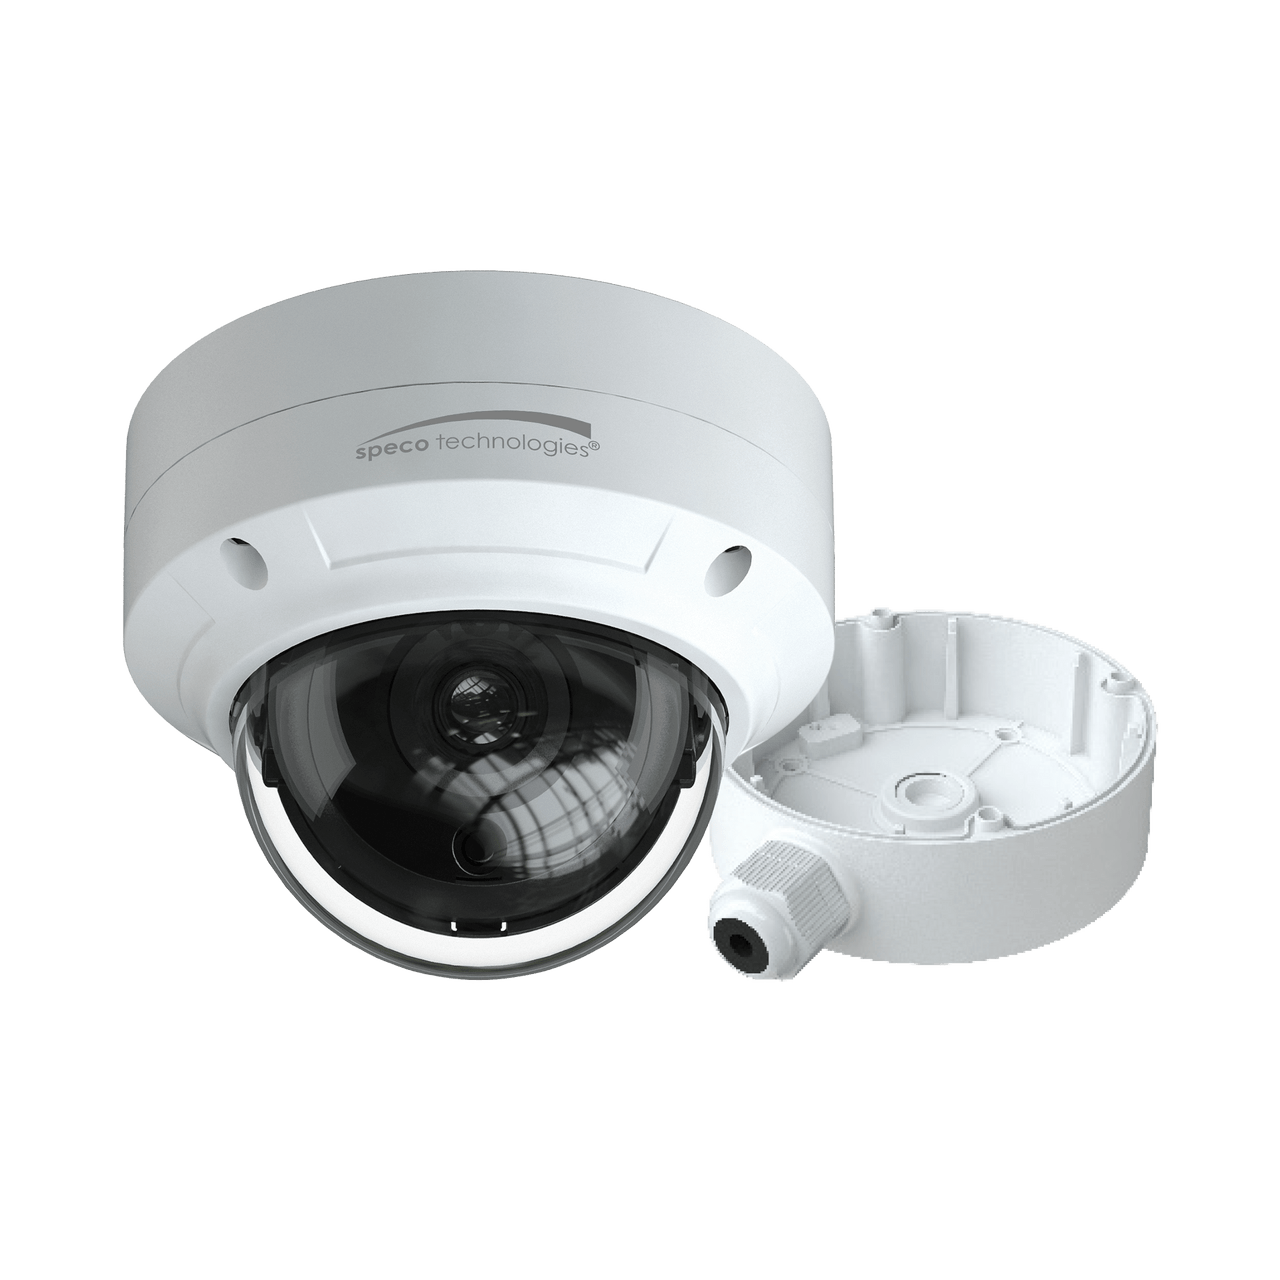 Speco Technologies O4D6 4MP H.265 AI IP Dome Camera with IR, 2.8mm Fixed lens, Included Junction Box, White Housing (O4D6)